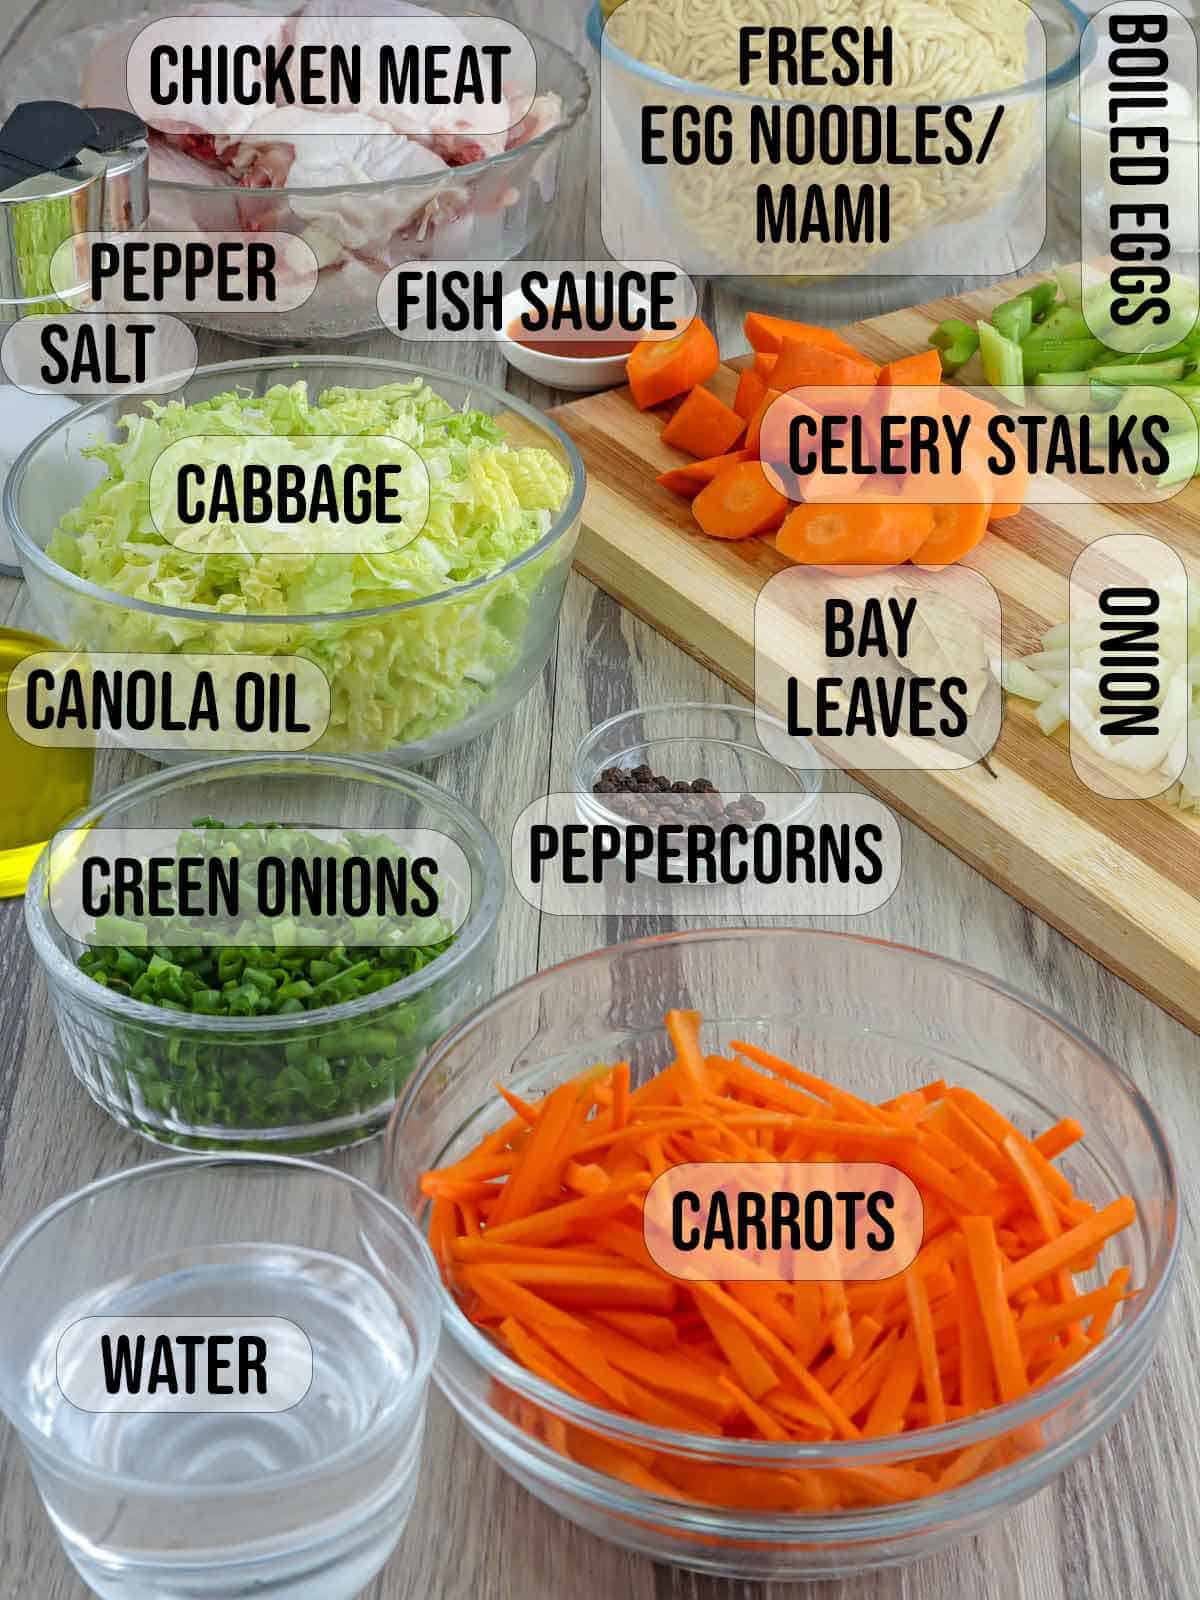 carrots, cabbage, eggs, water, celery, noodles, chicken, oil, salt, peppercorns, garlic, onions, green onions in bowls.